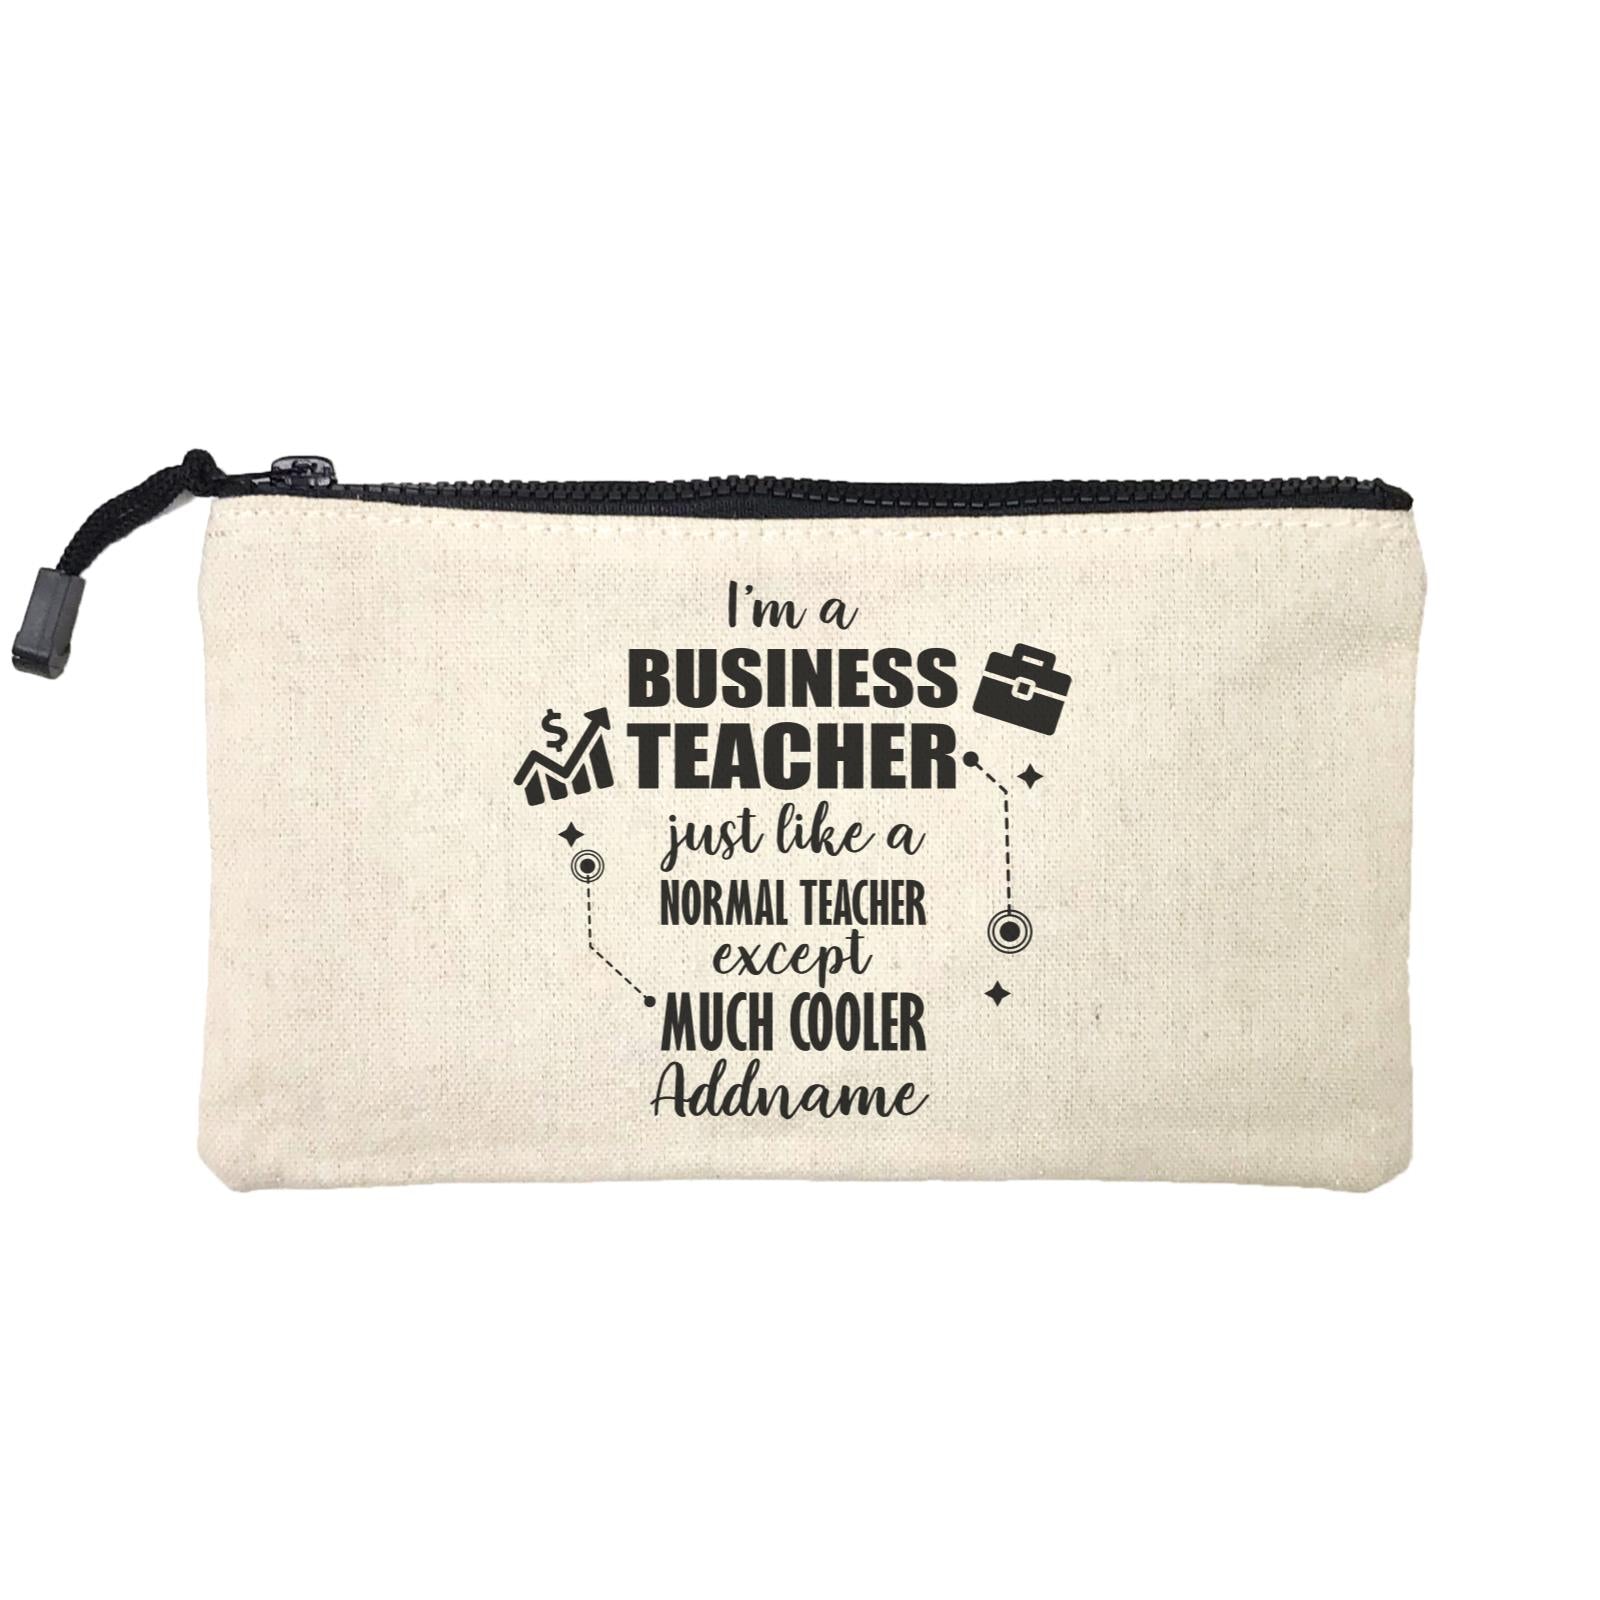 Subject Teachers I'm A Business Teacher Addname Mini Accessories Stationery Pouch